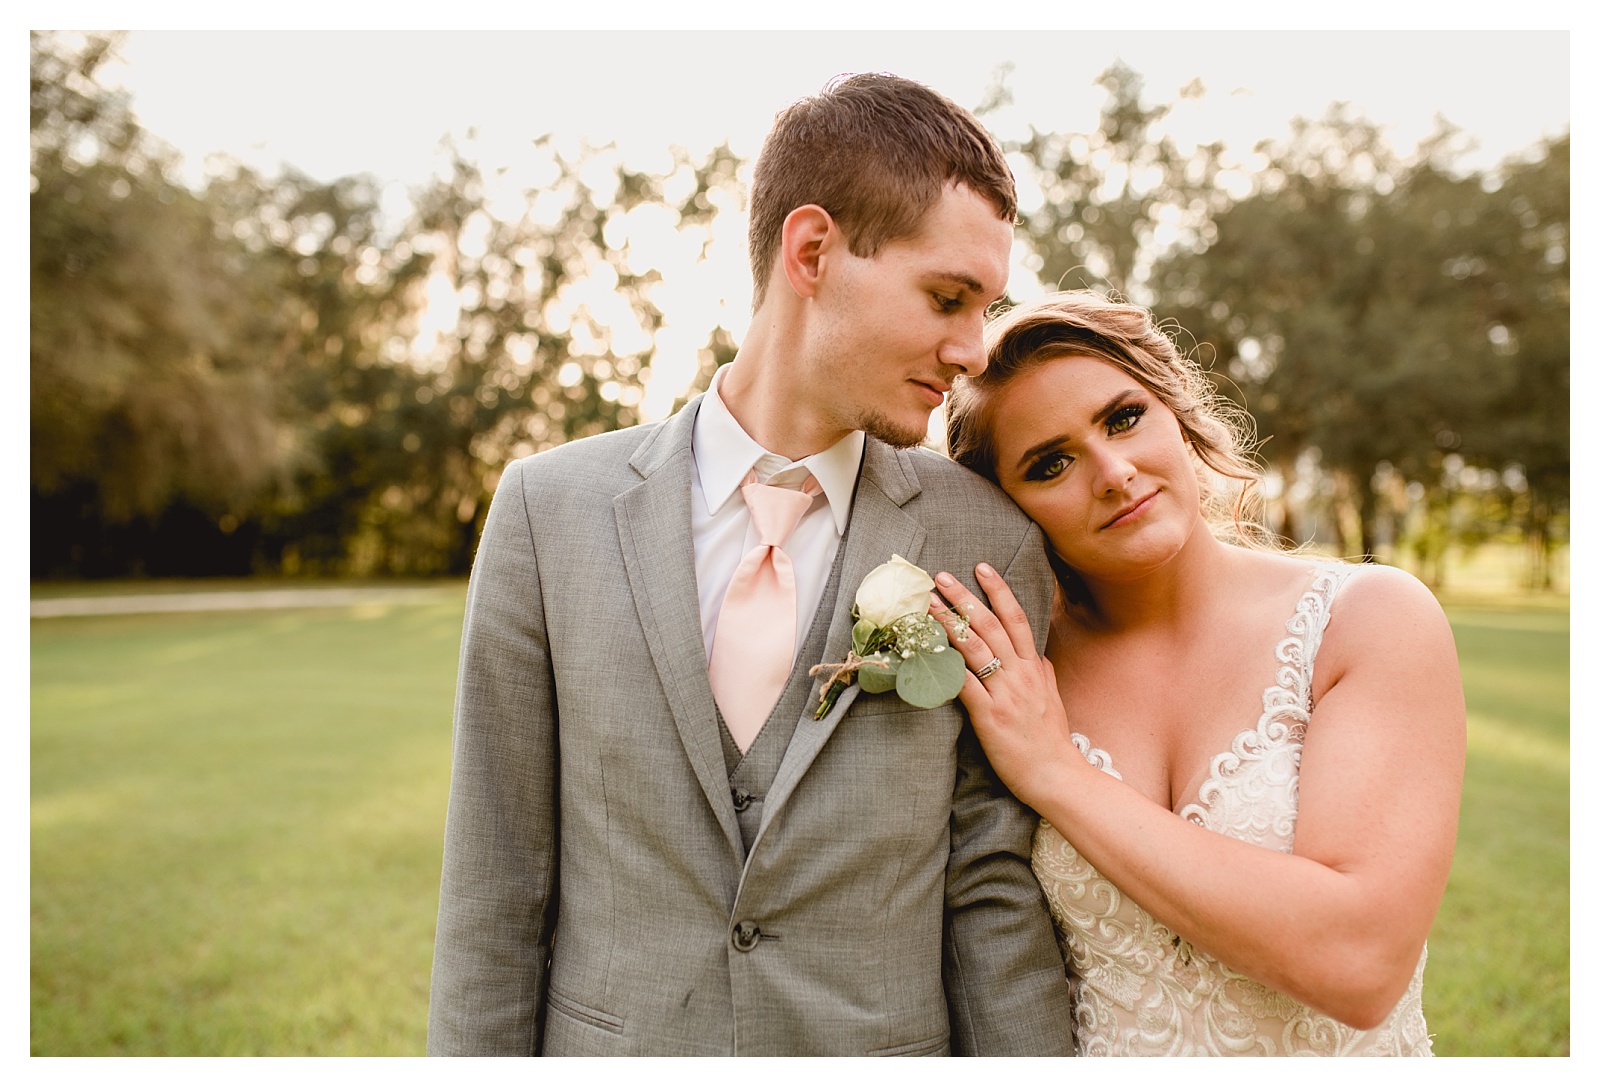 Bride and groom photo by professional photographer in north florida. Shelly Williams Photography